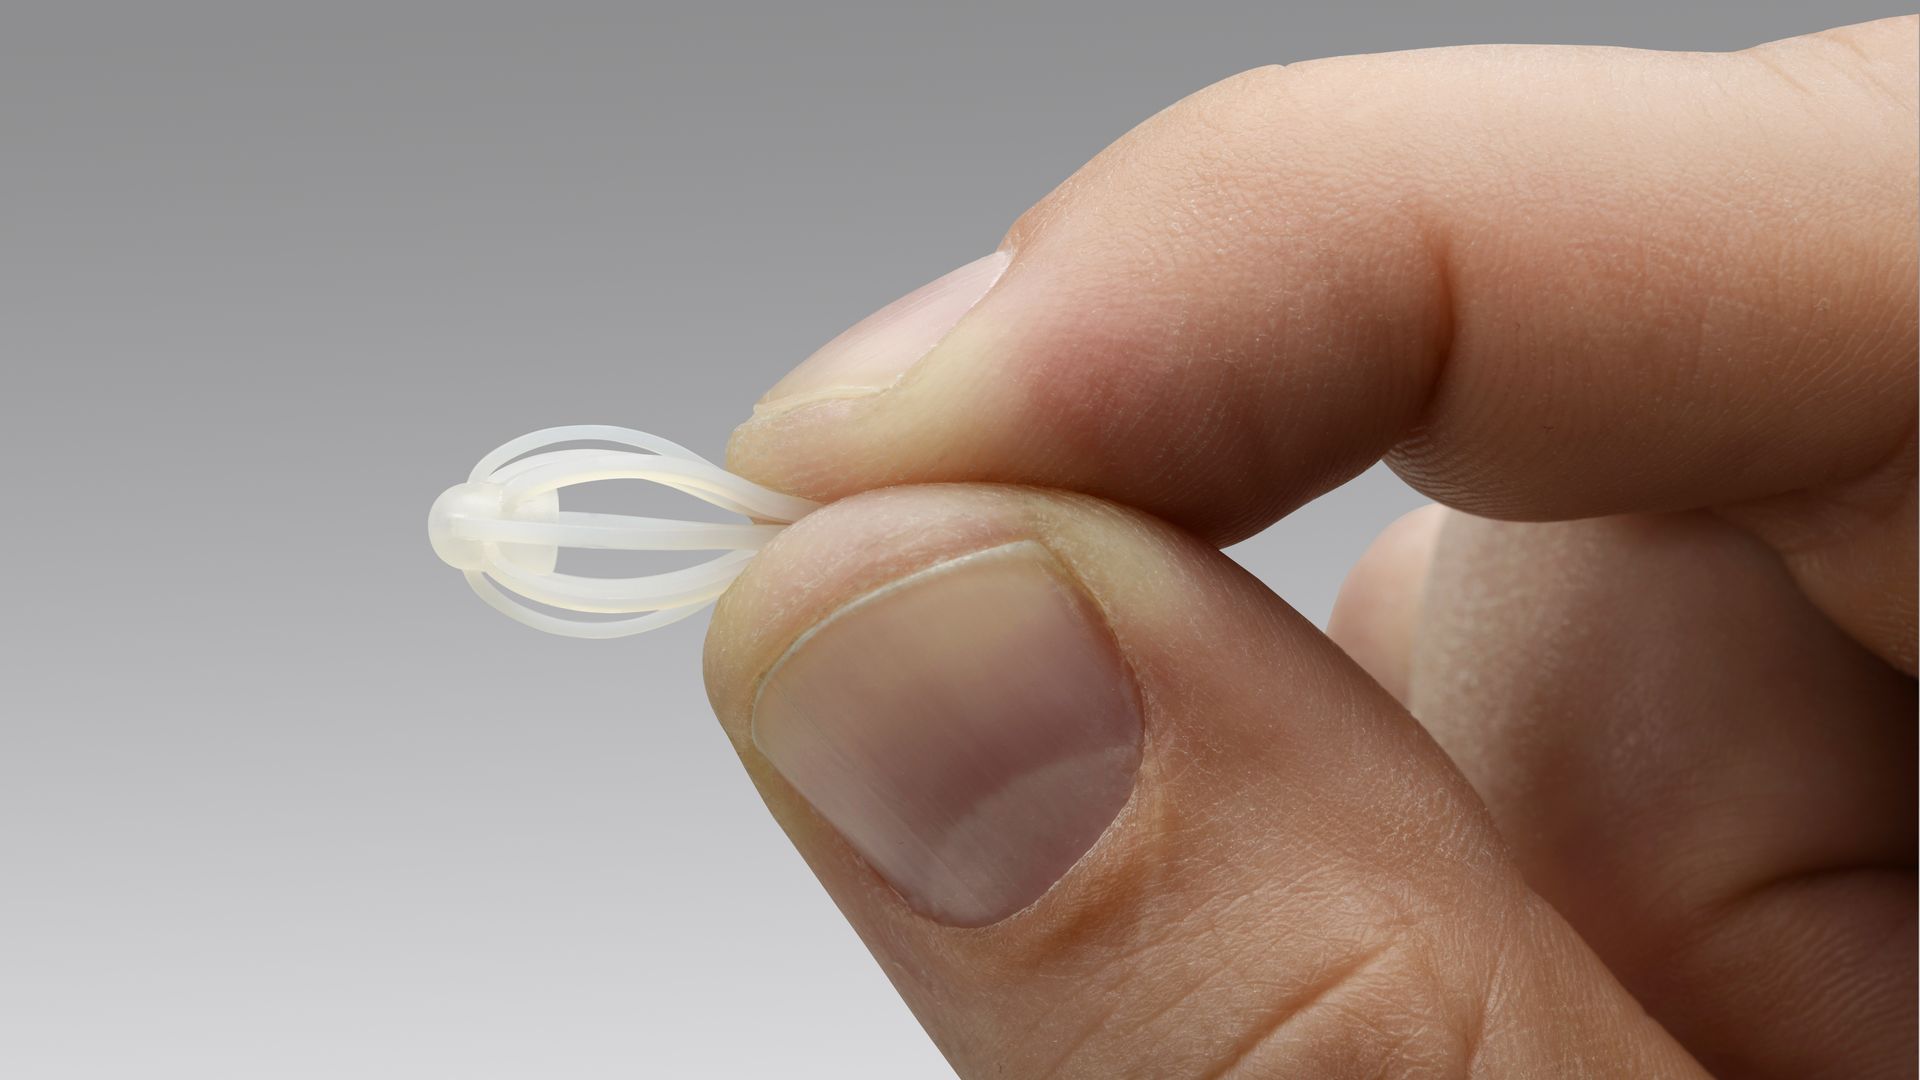 A person holding the small Sinuva drug device.